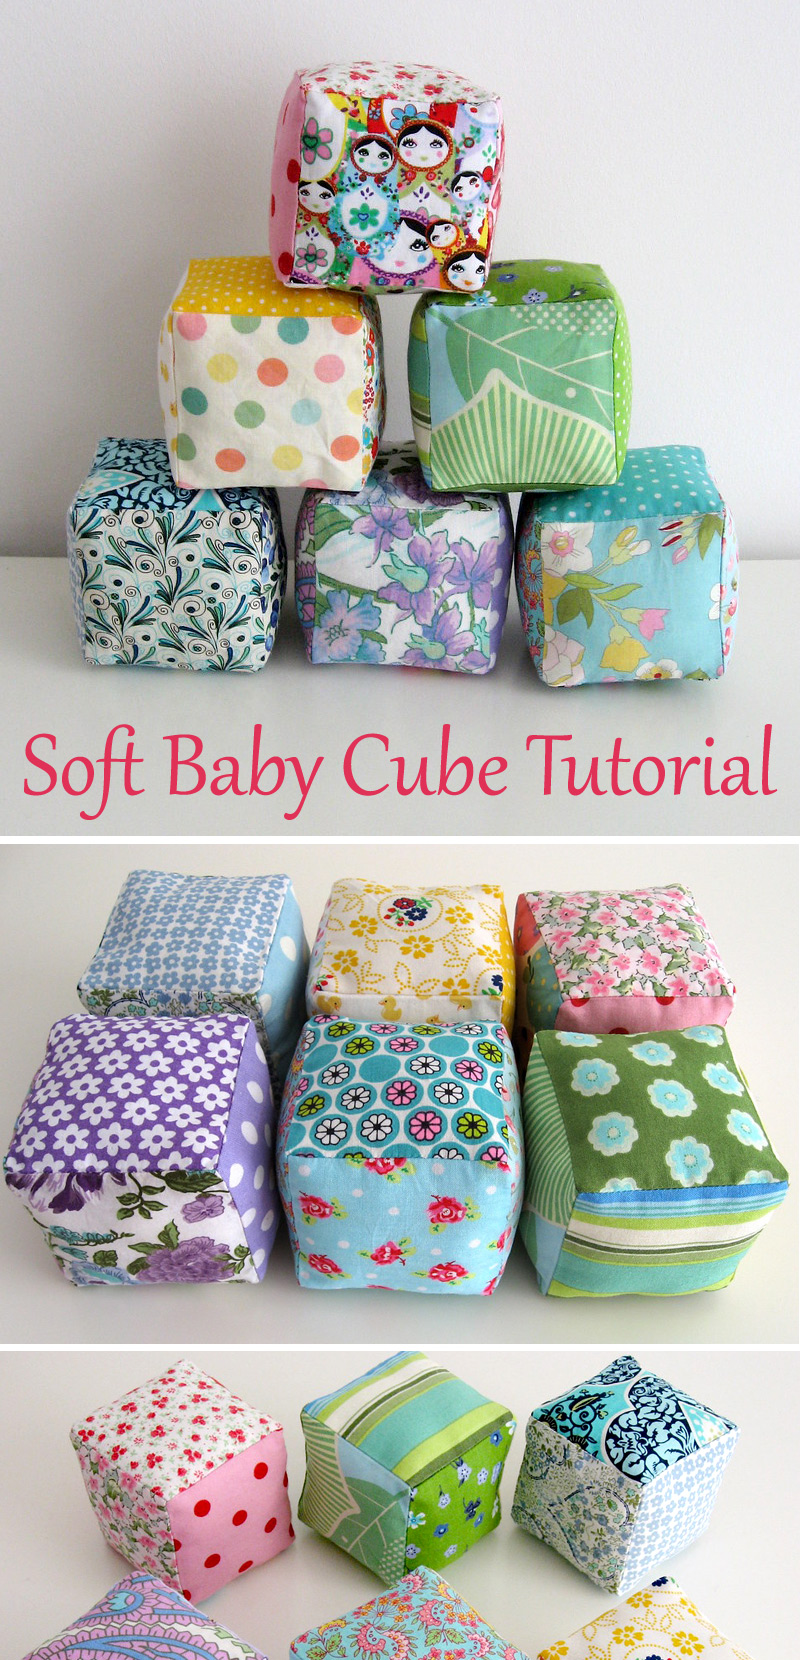 Soft Baby Cube Tutorial